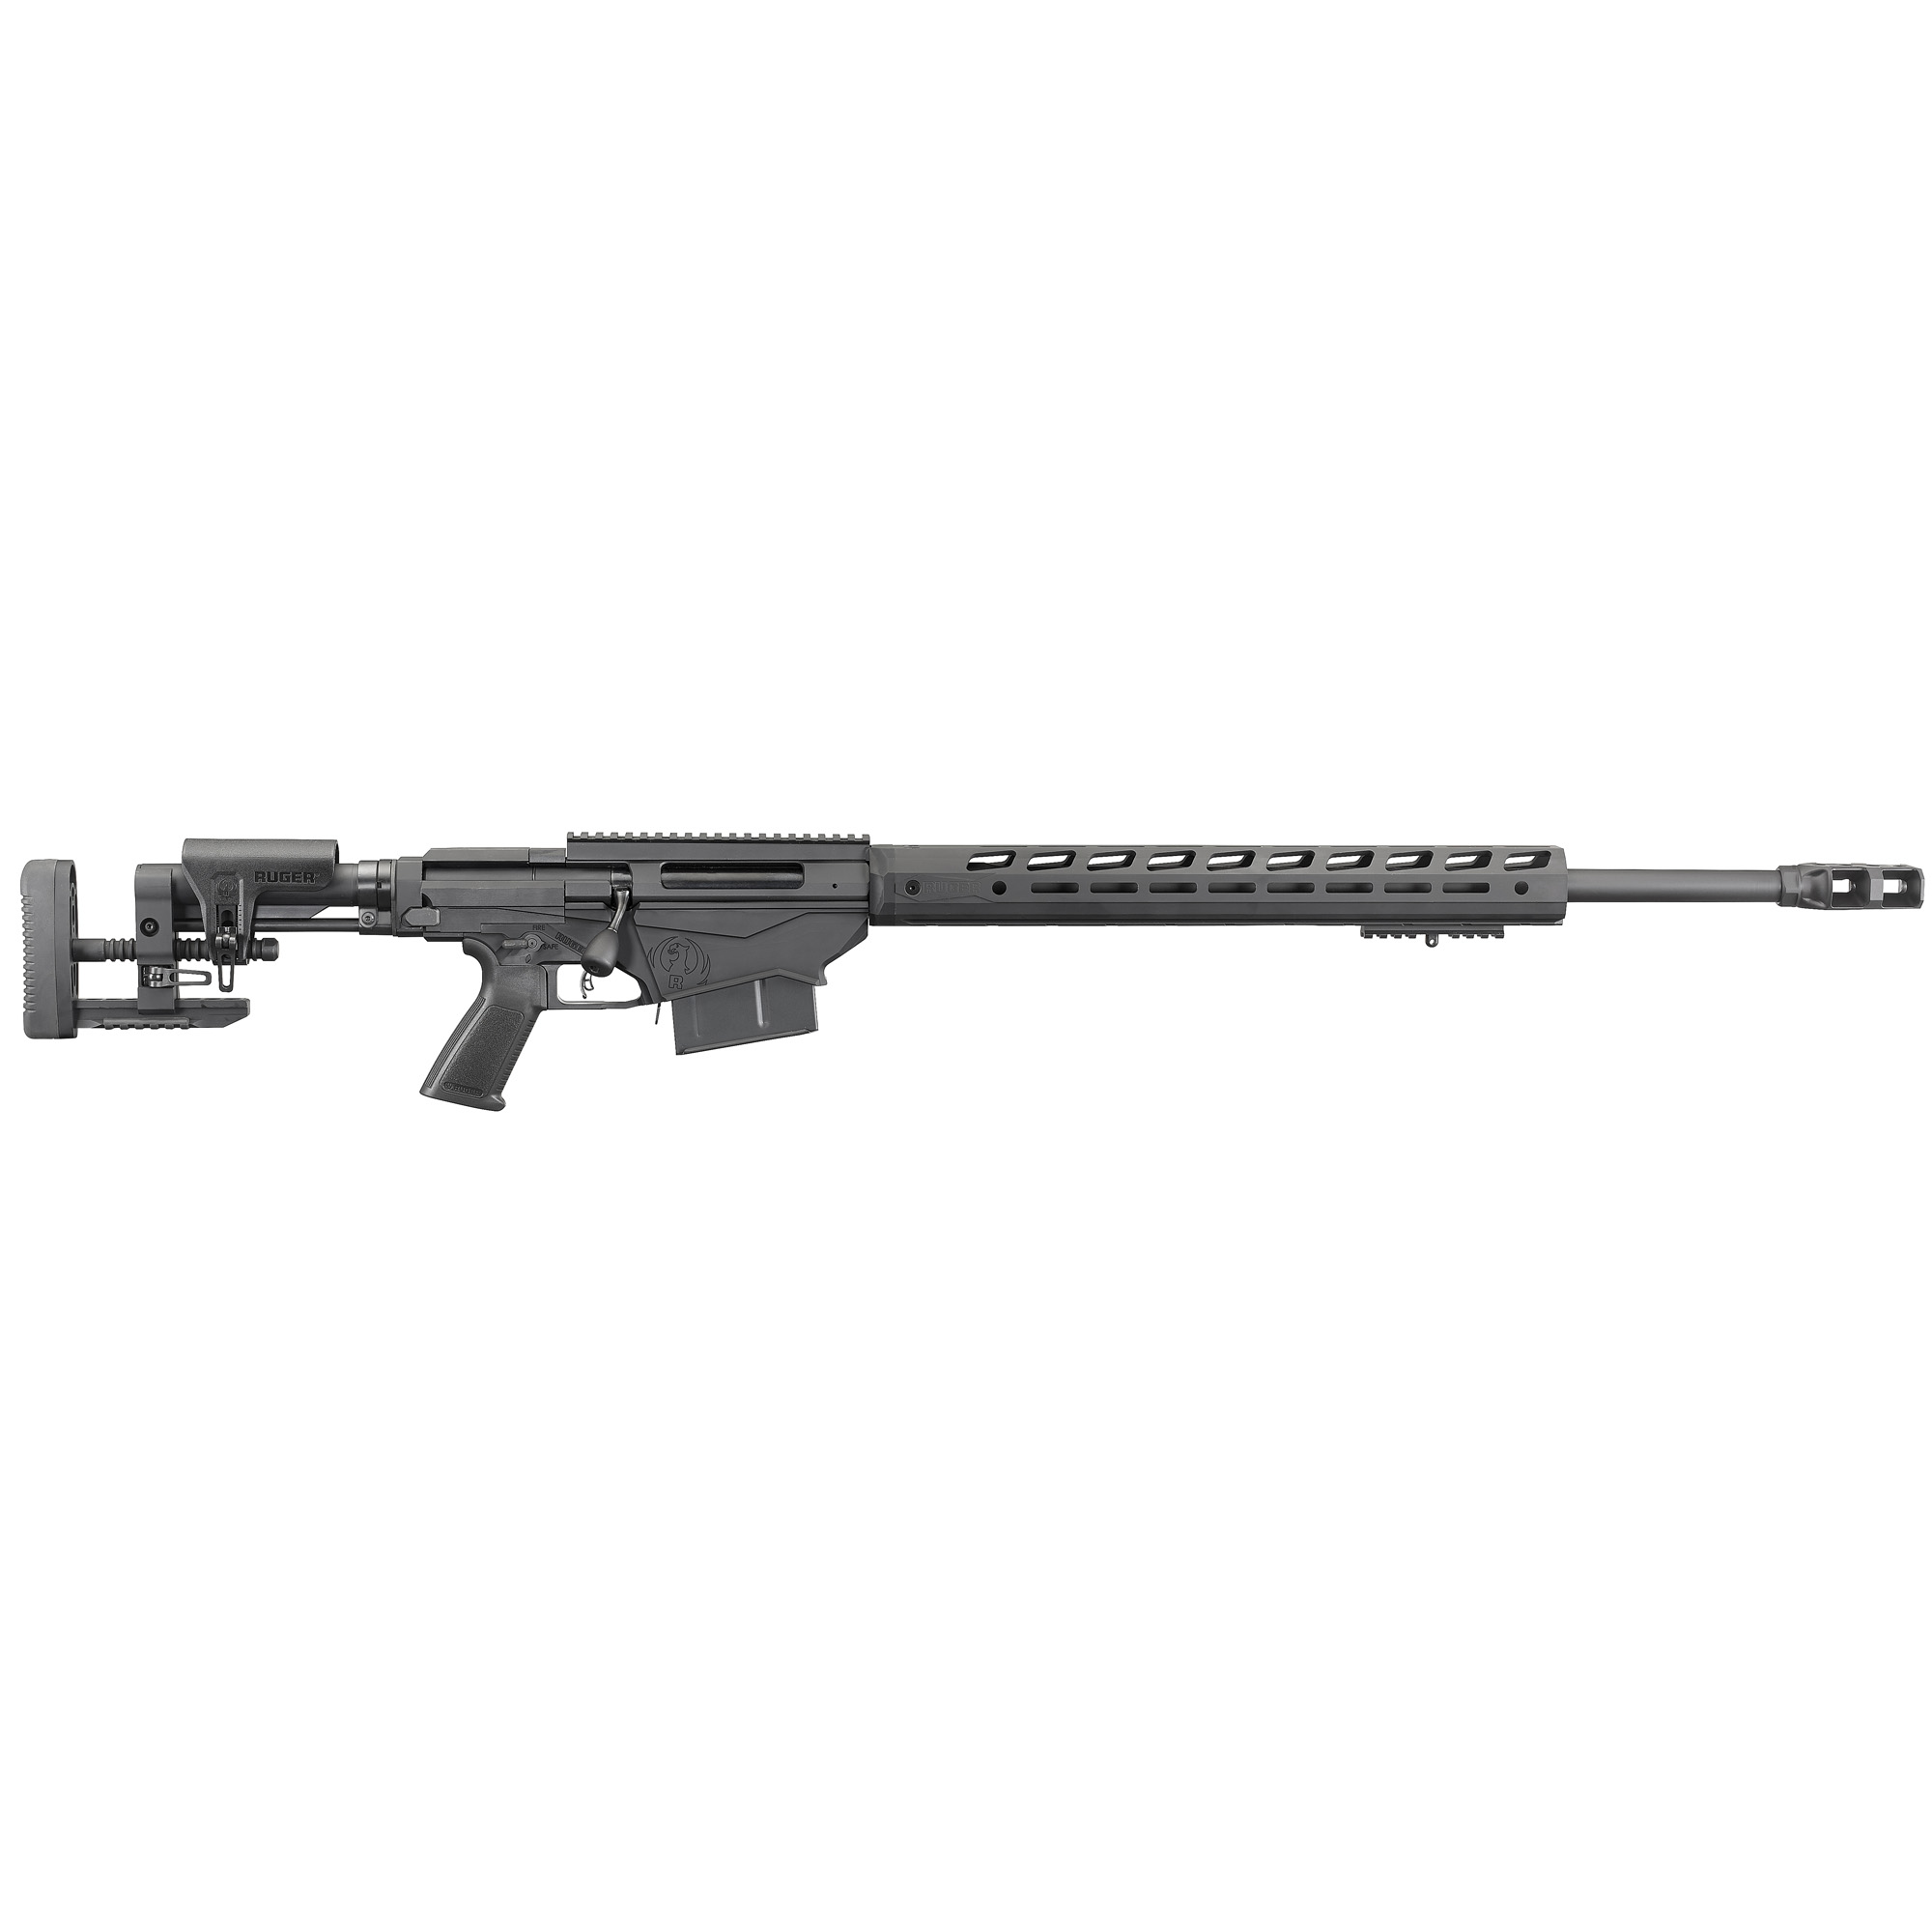 RUGER PRECISION RFL 338LAP 26 5RD